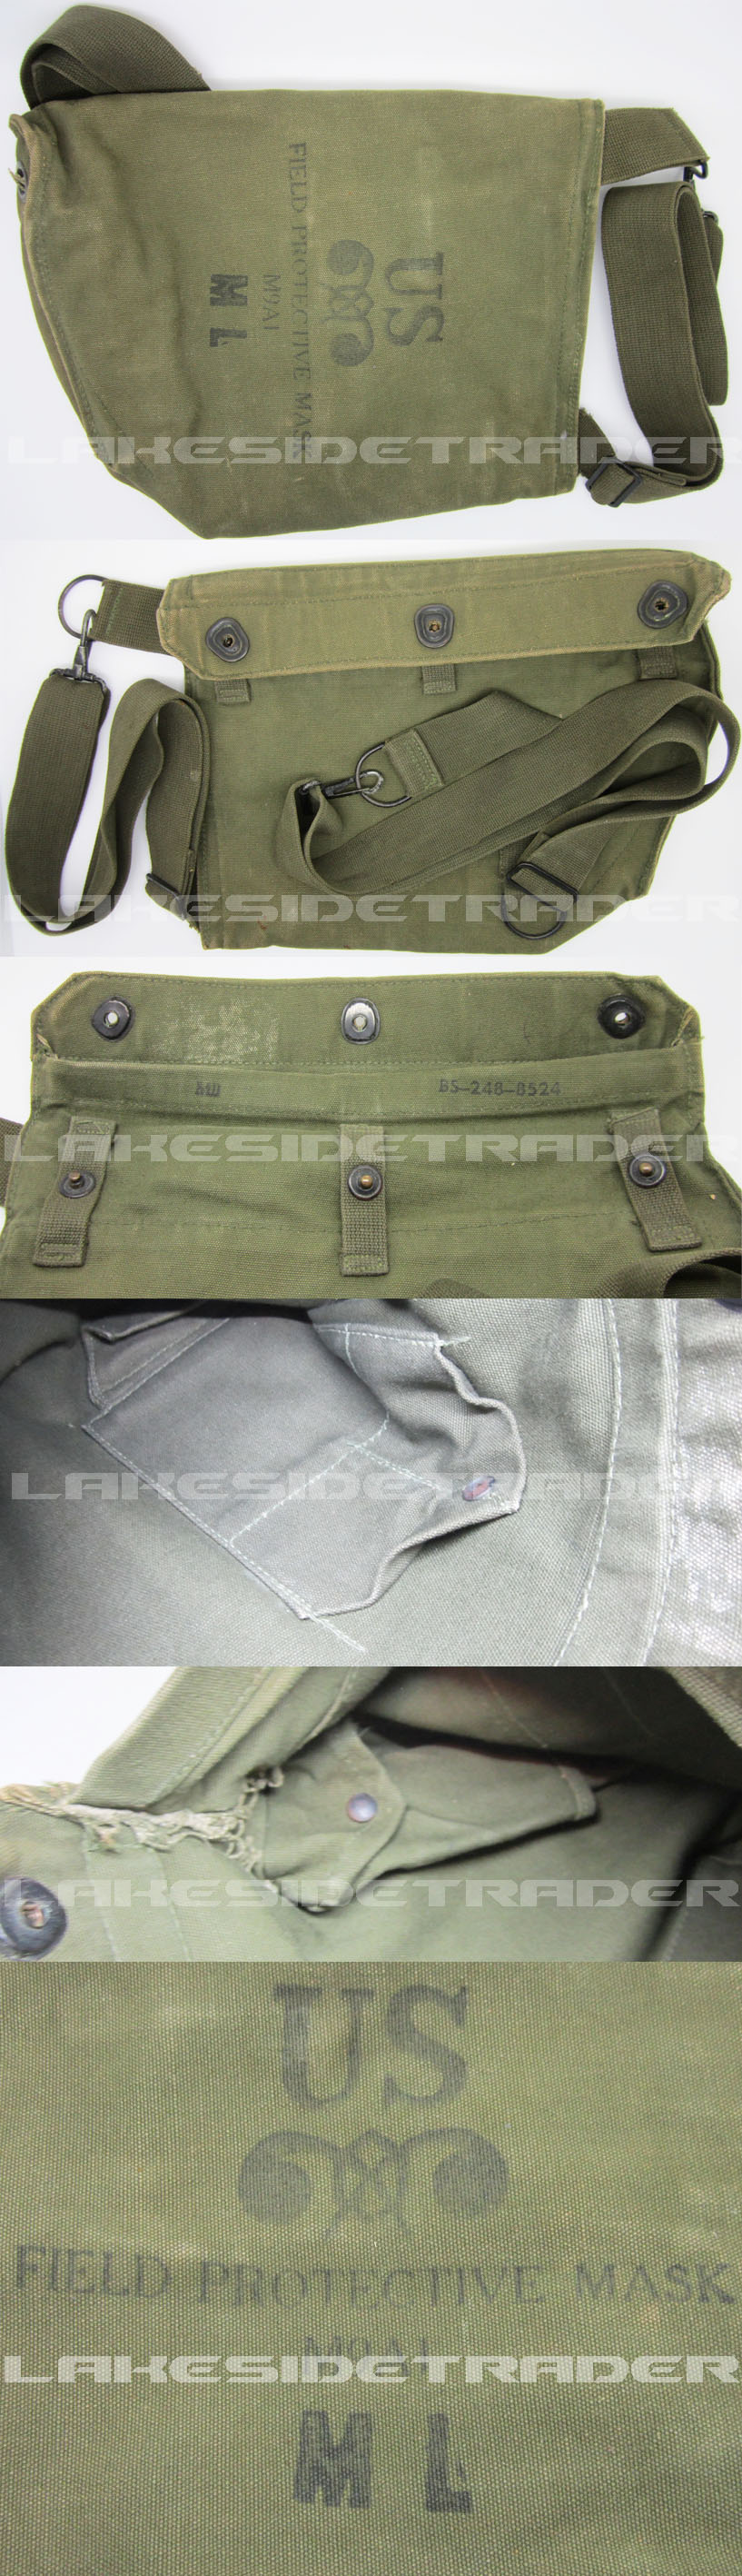 US Field Protective Mask M9A1 Bag